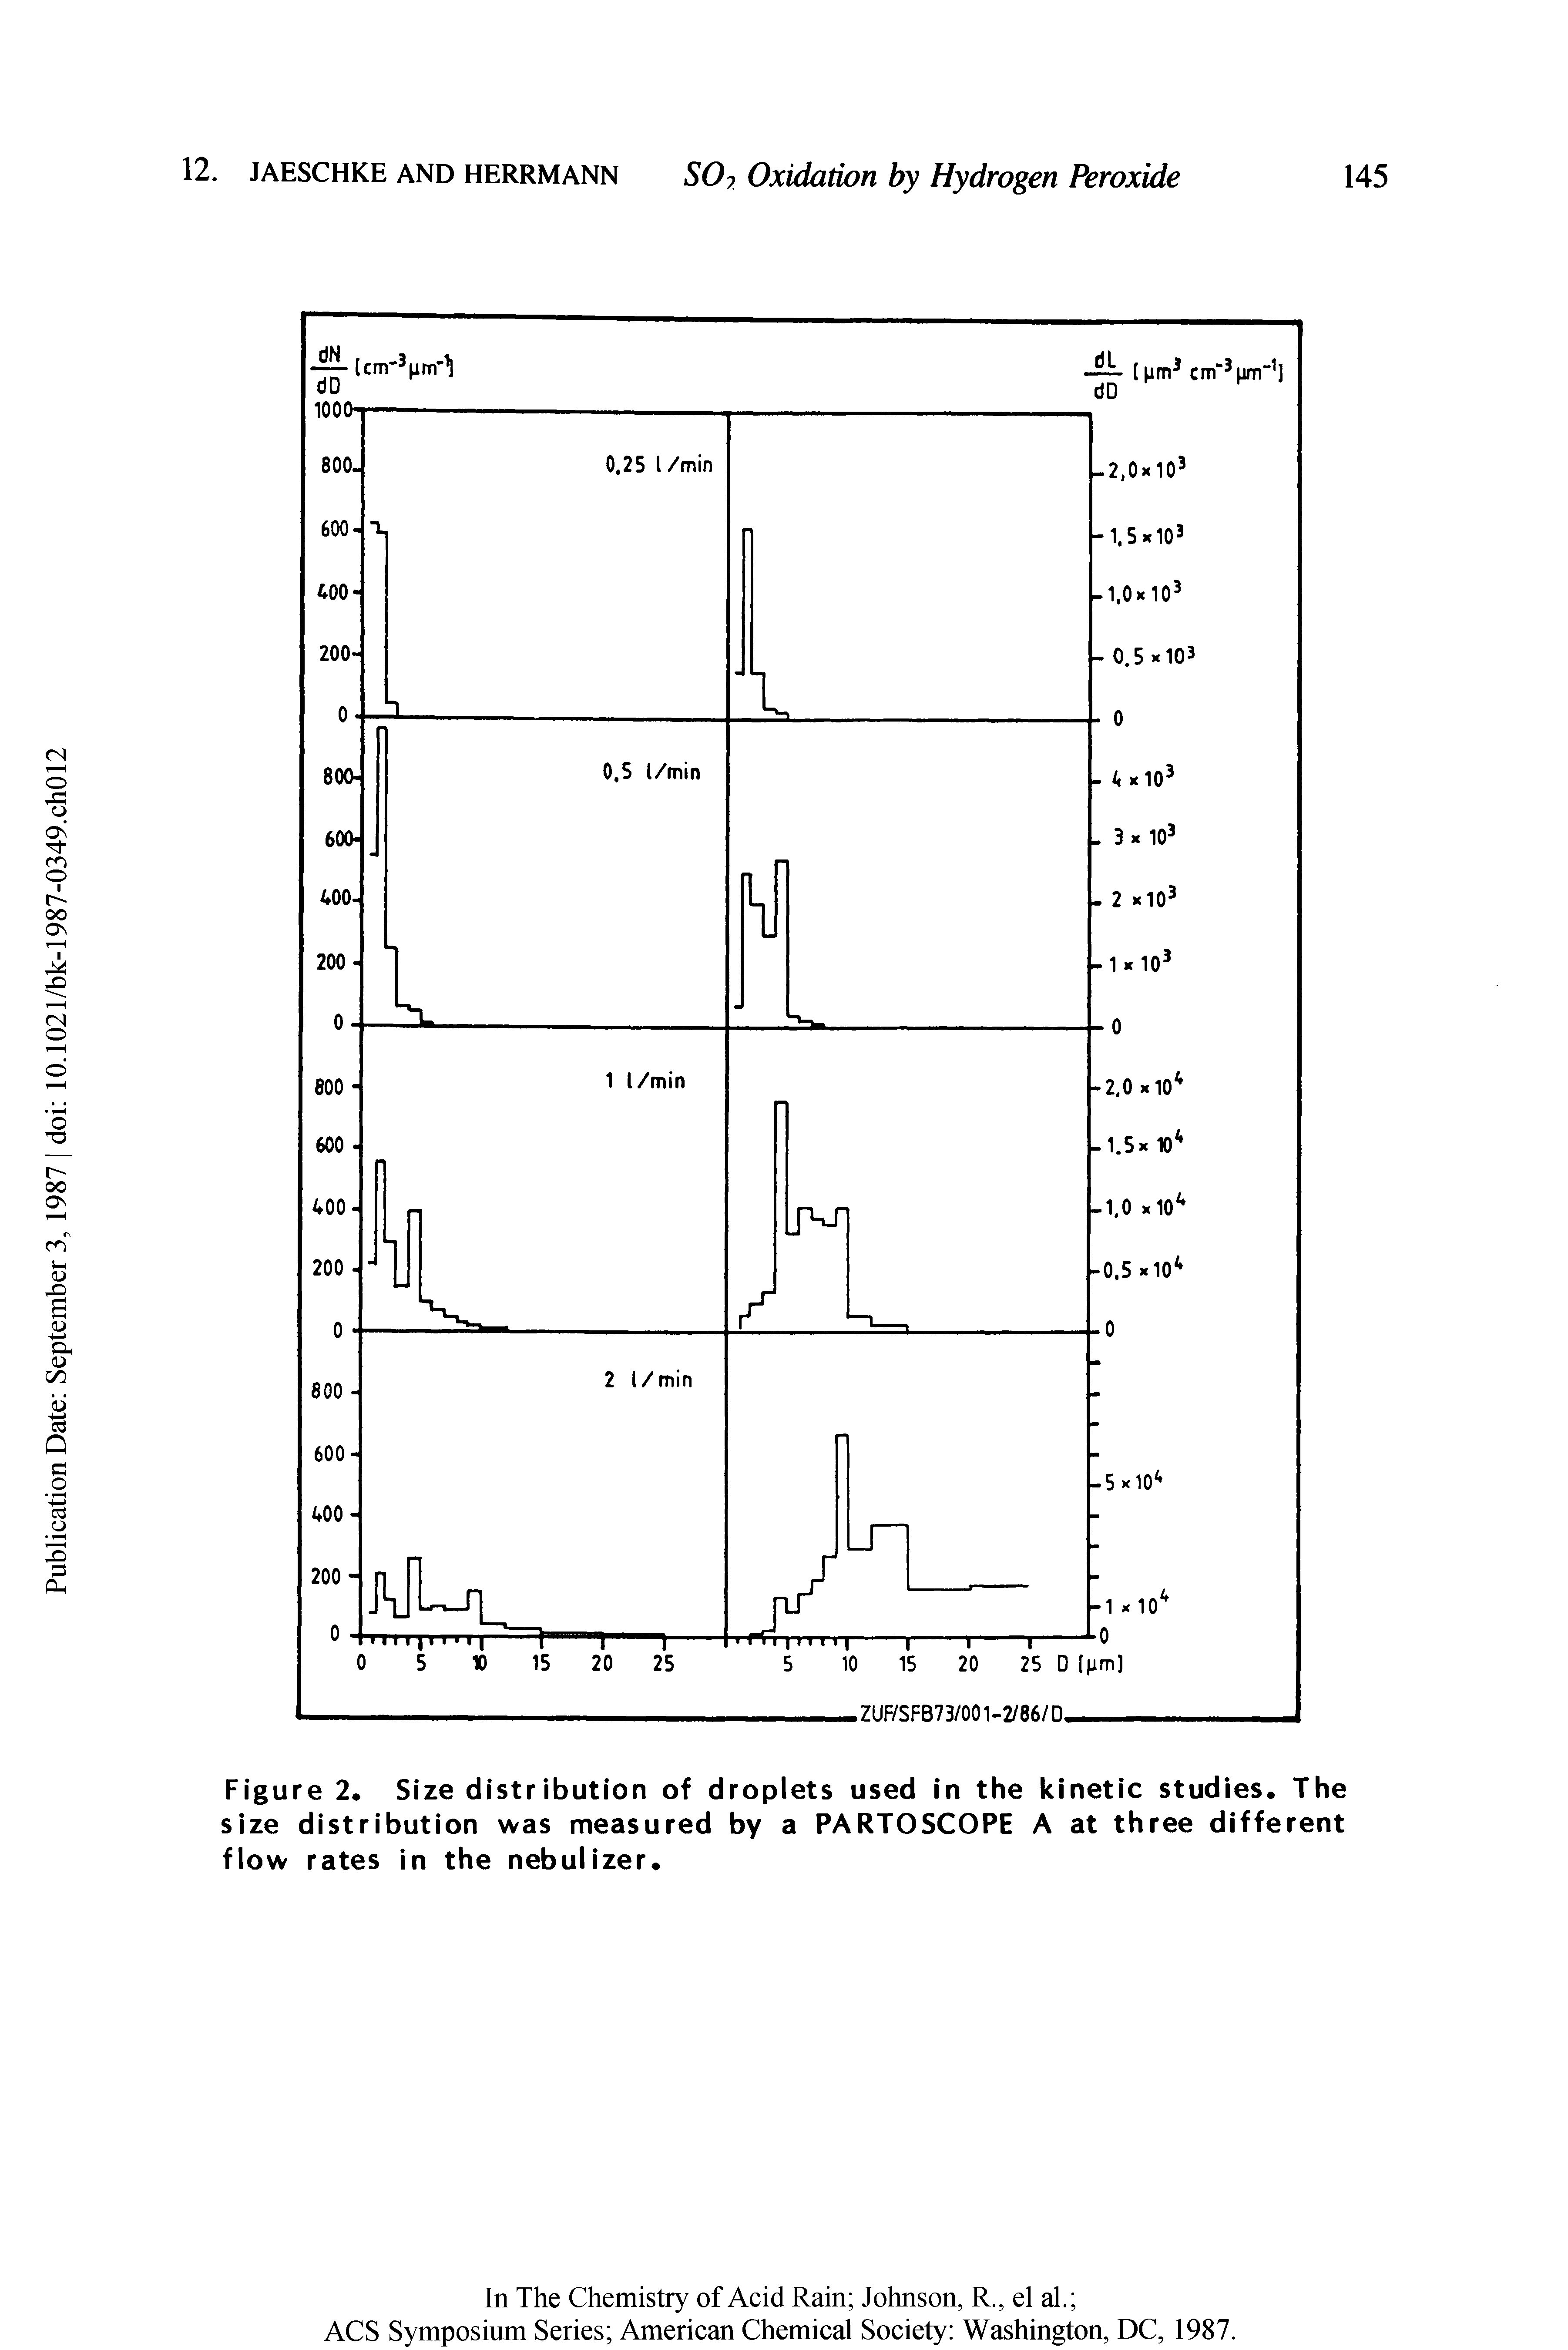 Figure 2. Size distribution of droplets used in the kinetic studies. The size distribution was measured by a PARTOSCOPE A at three different flow rates in the nebulizer.